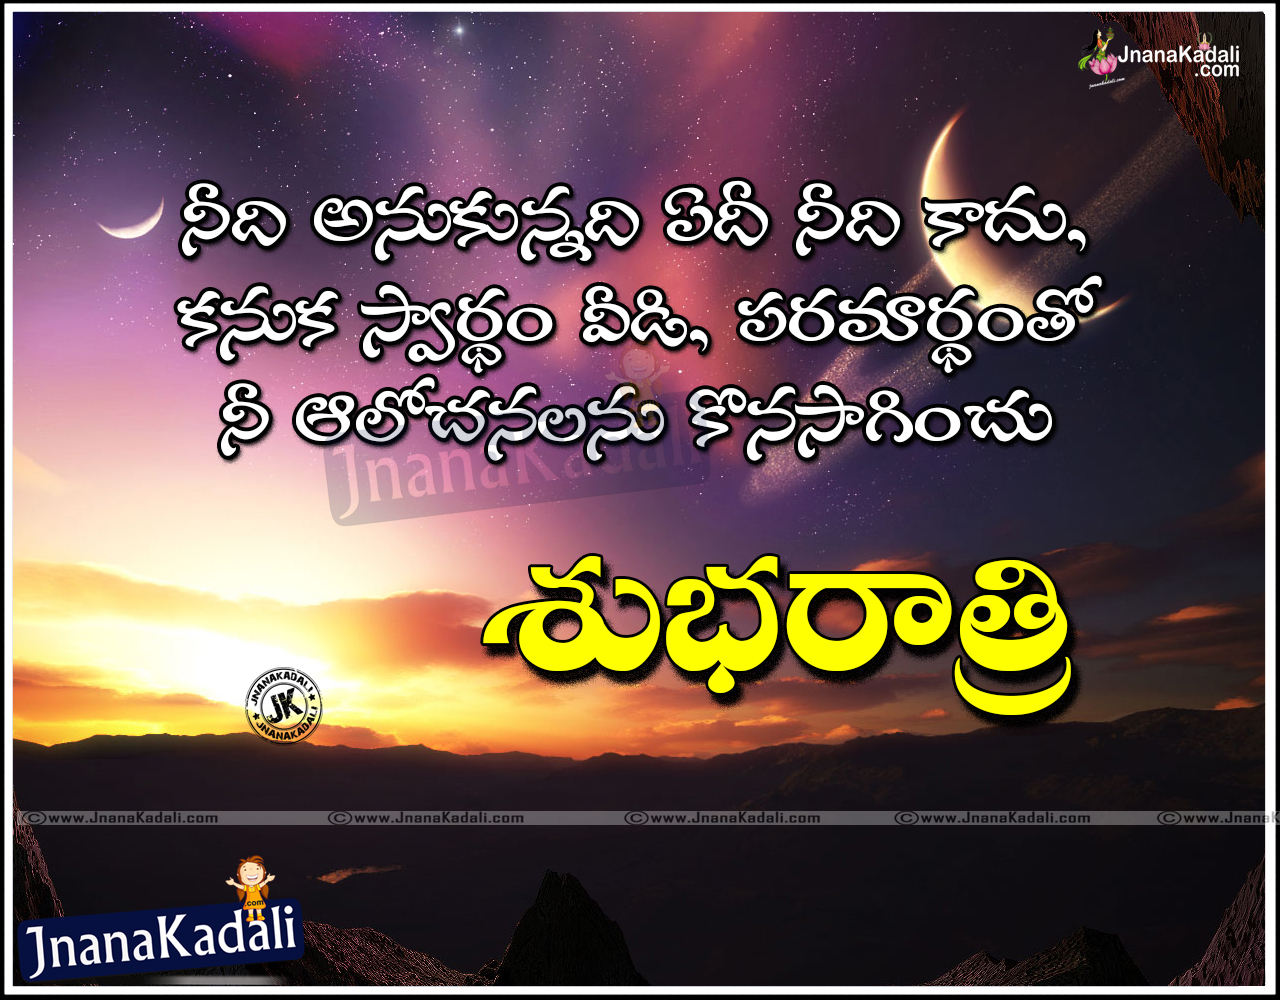 Telugu Good Night status messages with Friendship quotes | JNANA ...